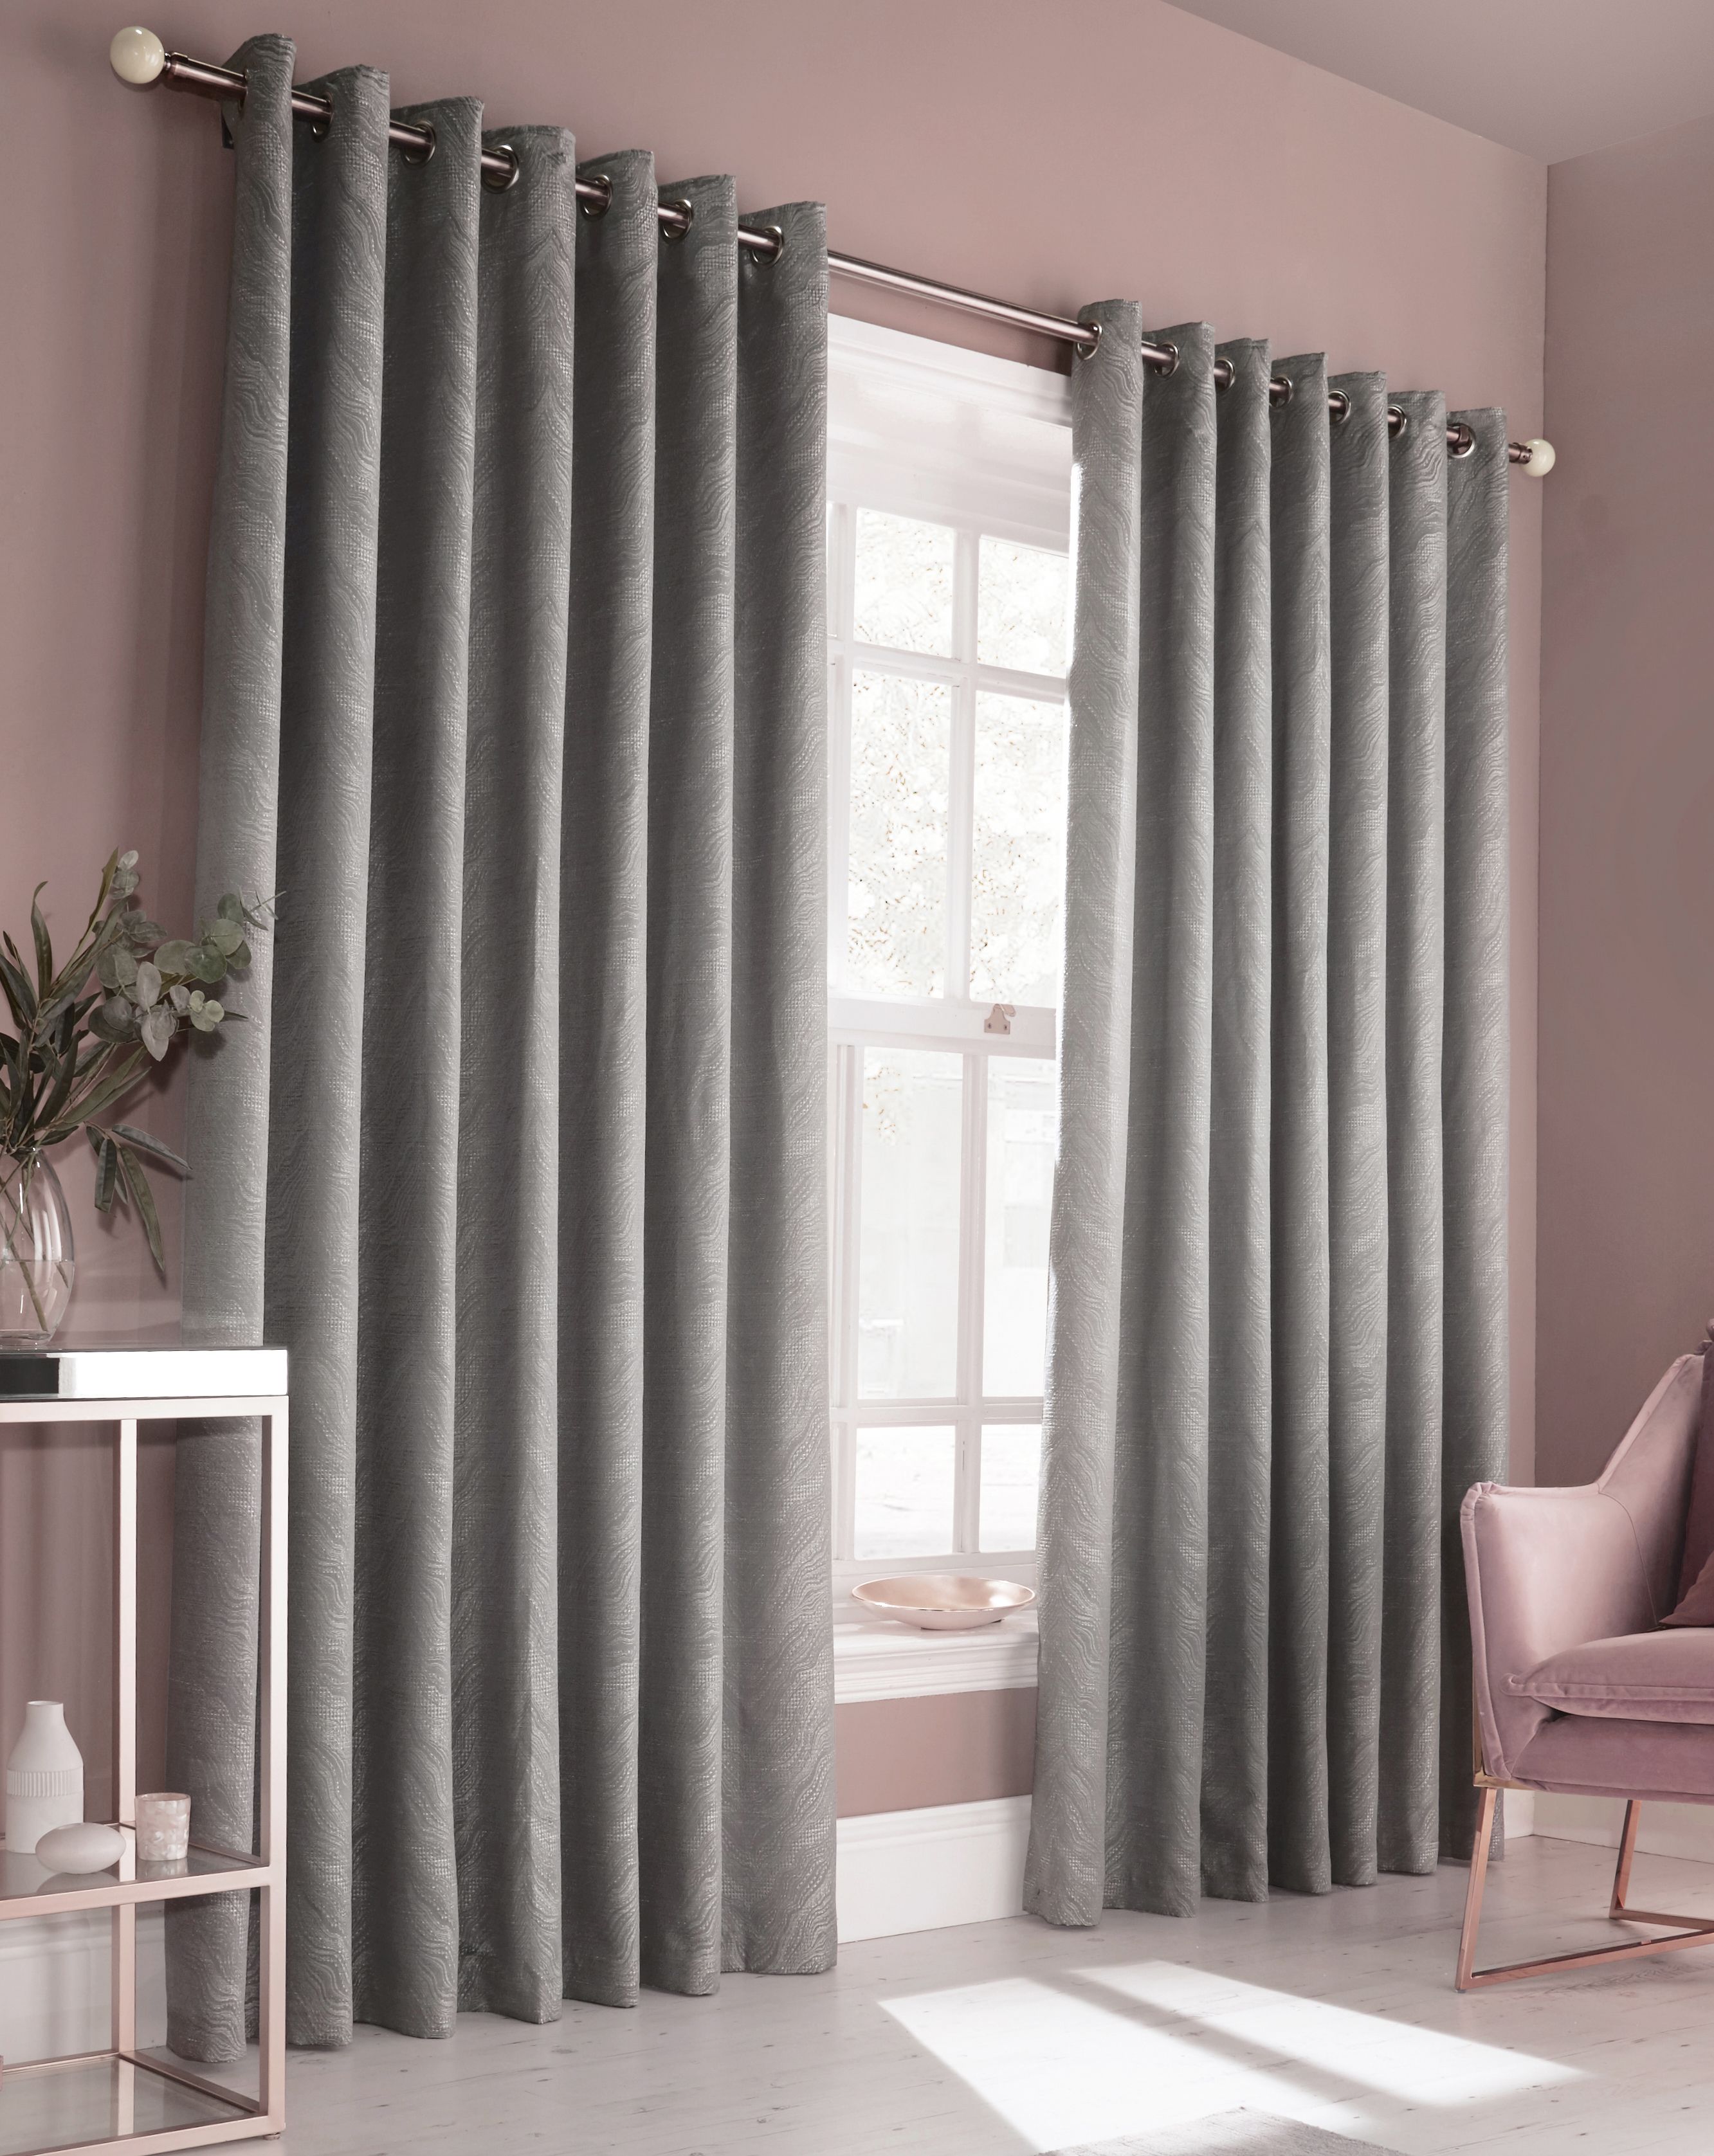 Add some glamour and style to your décor with this modern and chic curtain set. Featuring a luminescent jacquard pattern, inspired by natural marble and precious stones is accentuated when light catches. Perfect for a luxe styled bedroom or elegant living room, these curtains are bound to make a statement.